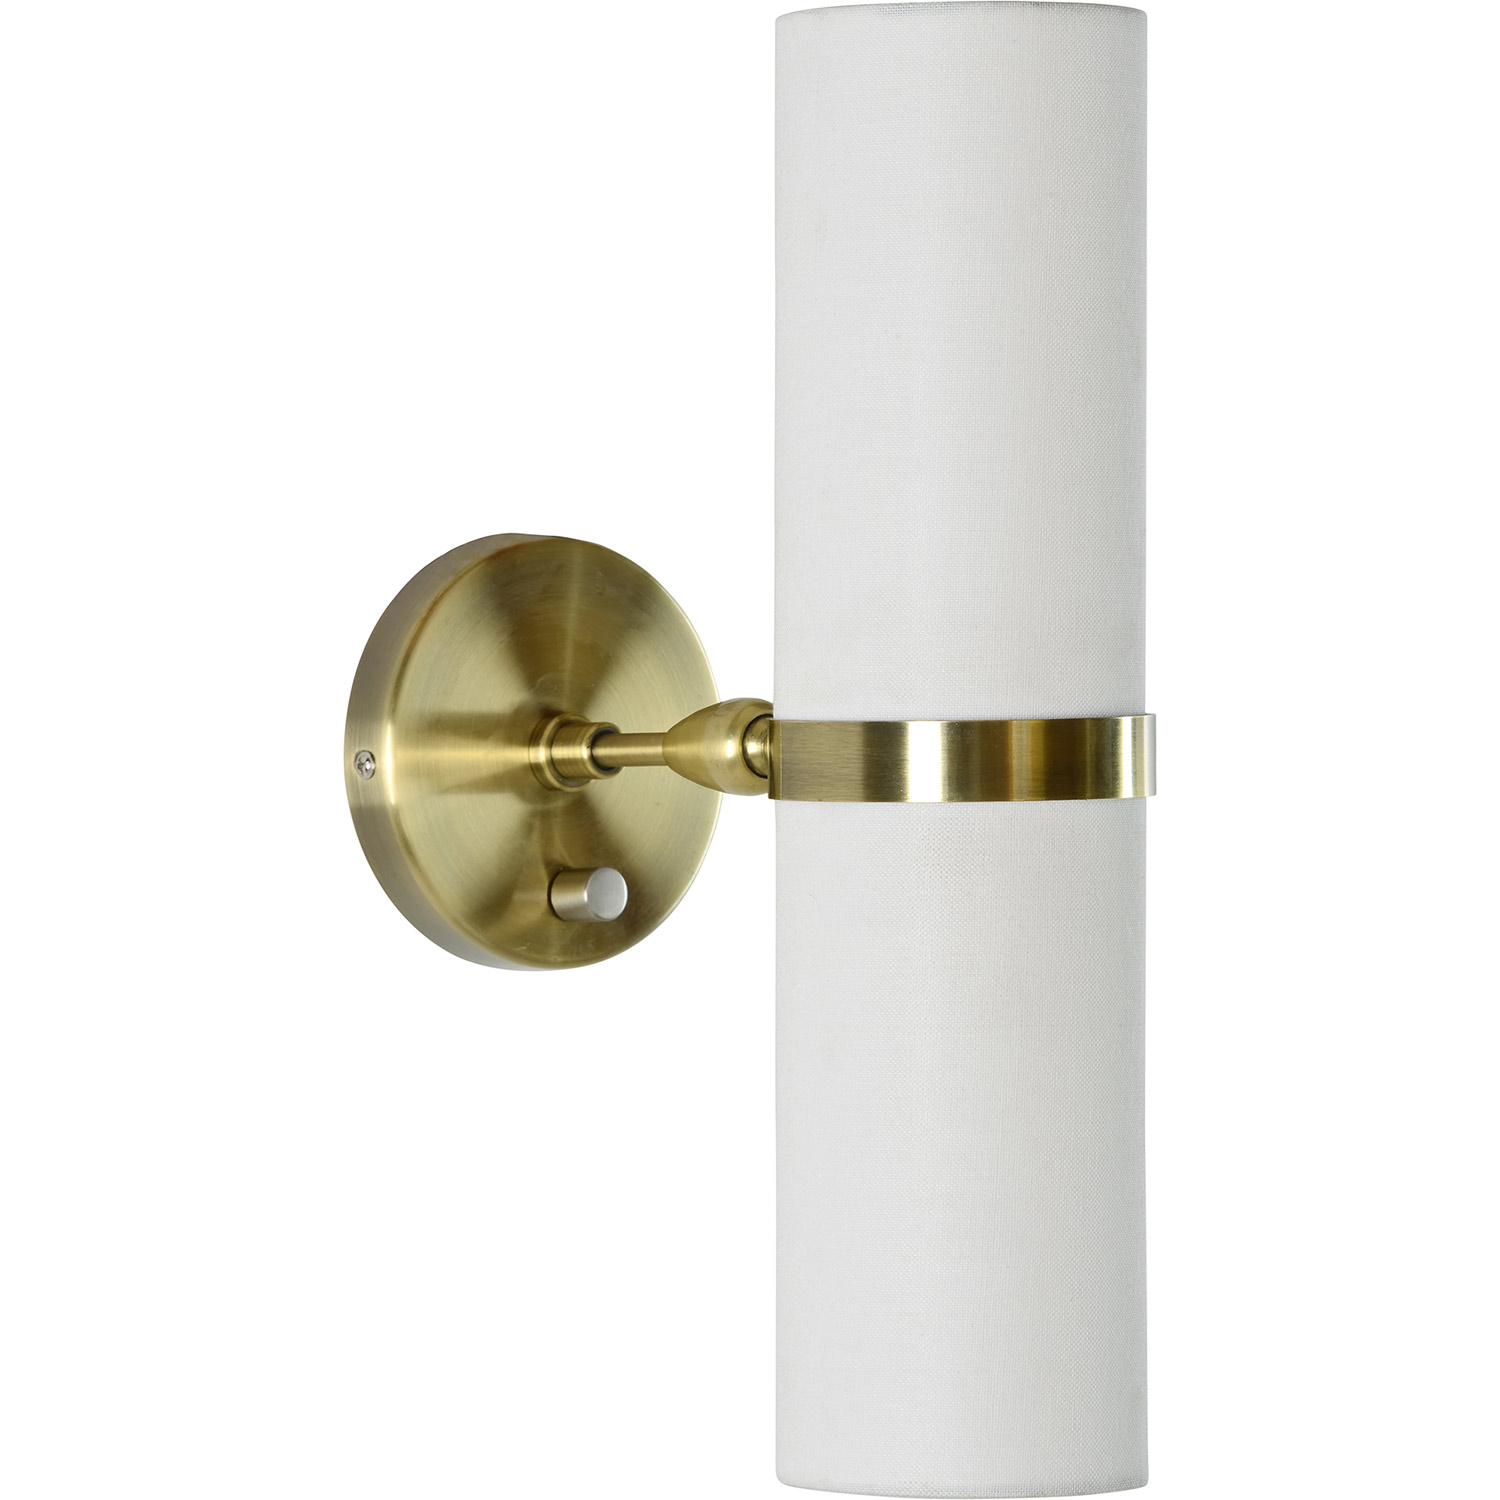 Ren-Wil Holtham Wall Sconce - Antique Brass